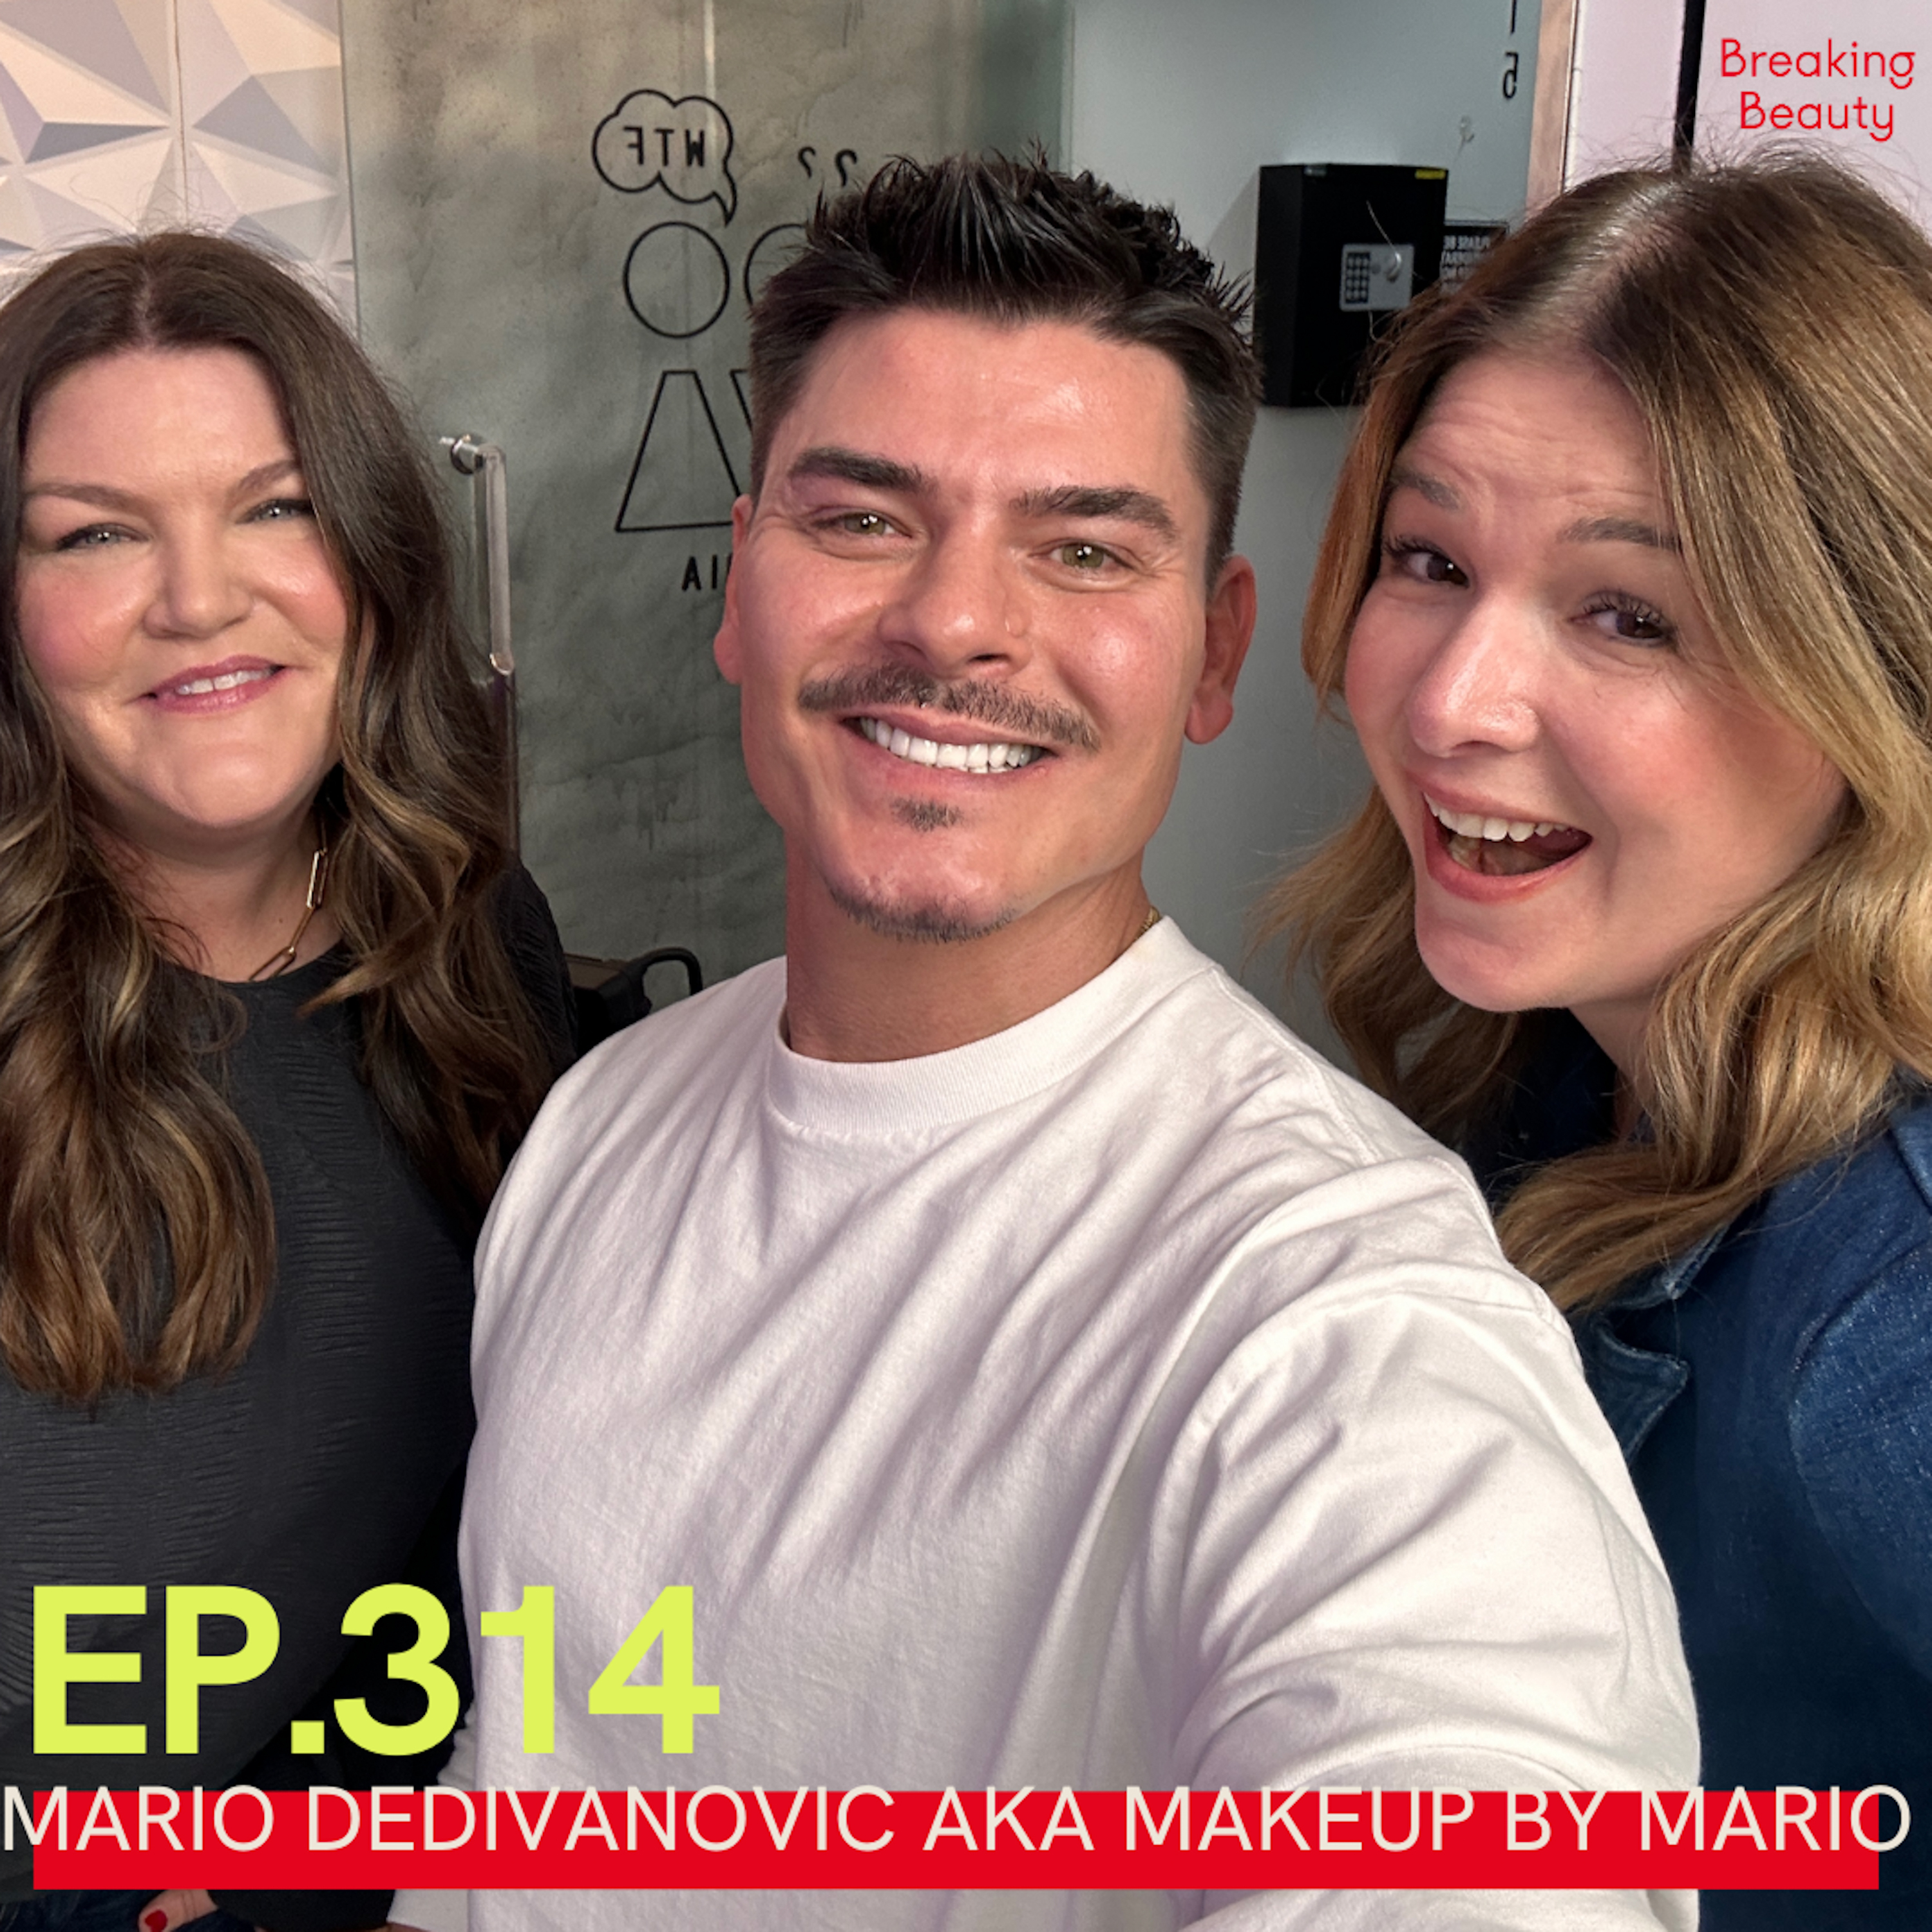 Makeup By Mario is Here to Share The New Makeup Rules for 2024, The Secret Project He’s Working On and The Never-Heard-Before, Very Personal Manifestation for The Year Ahead